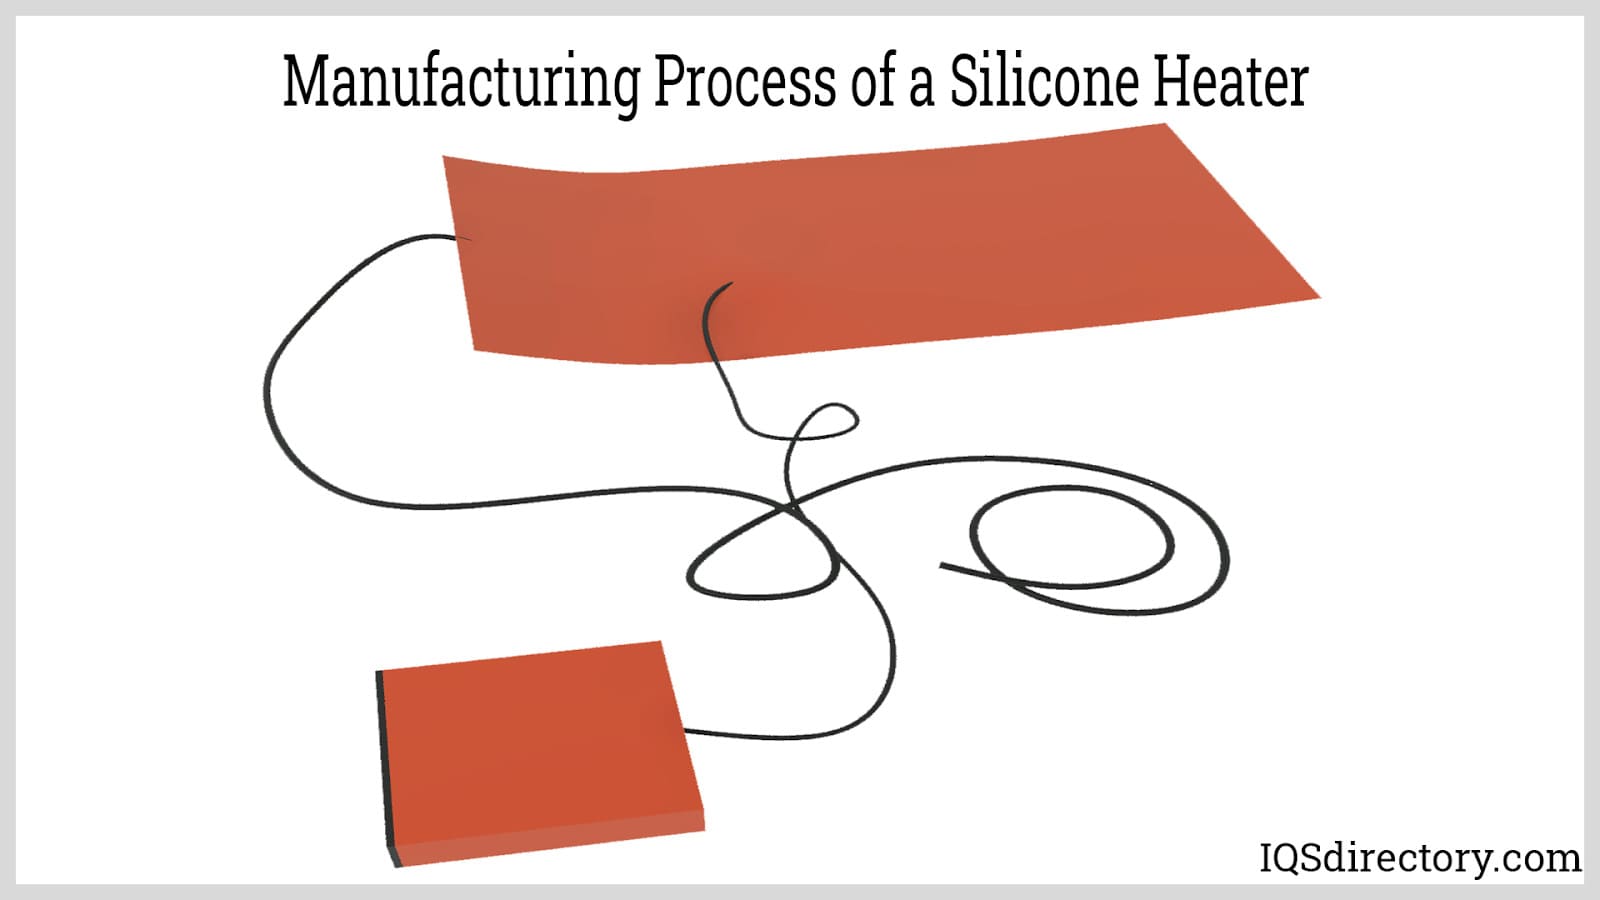 Manufacturing Process of a Silicone Heater